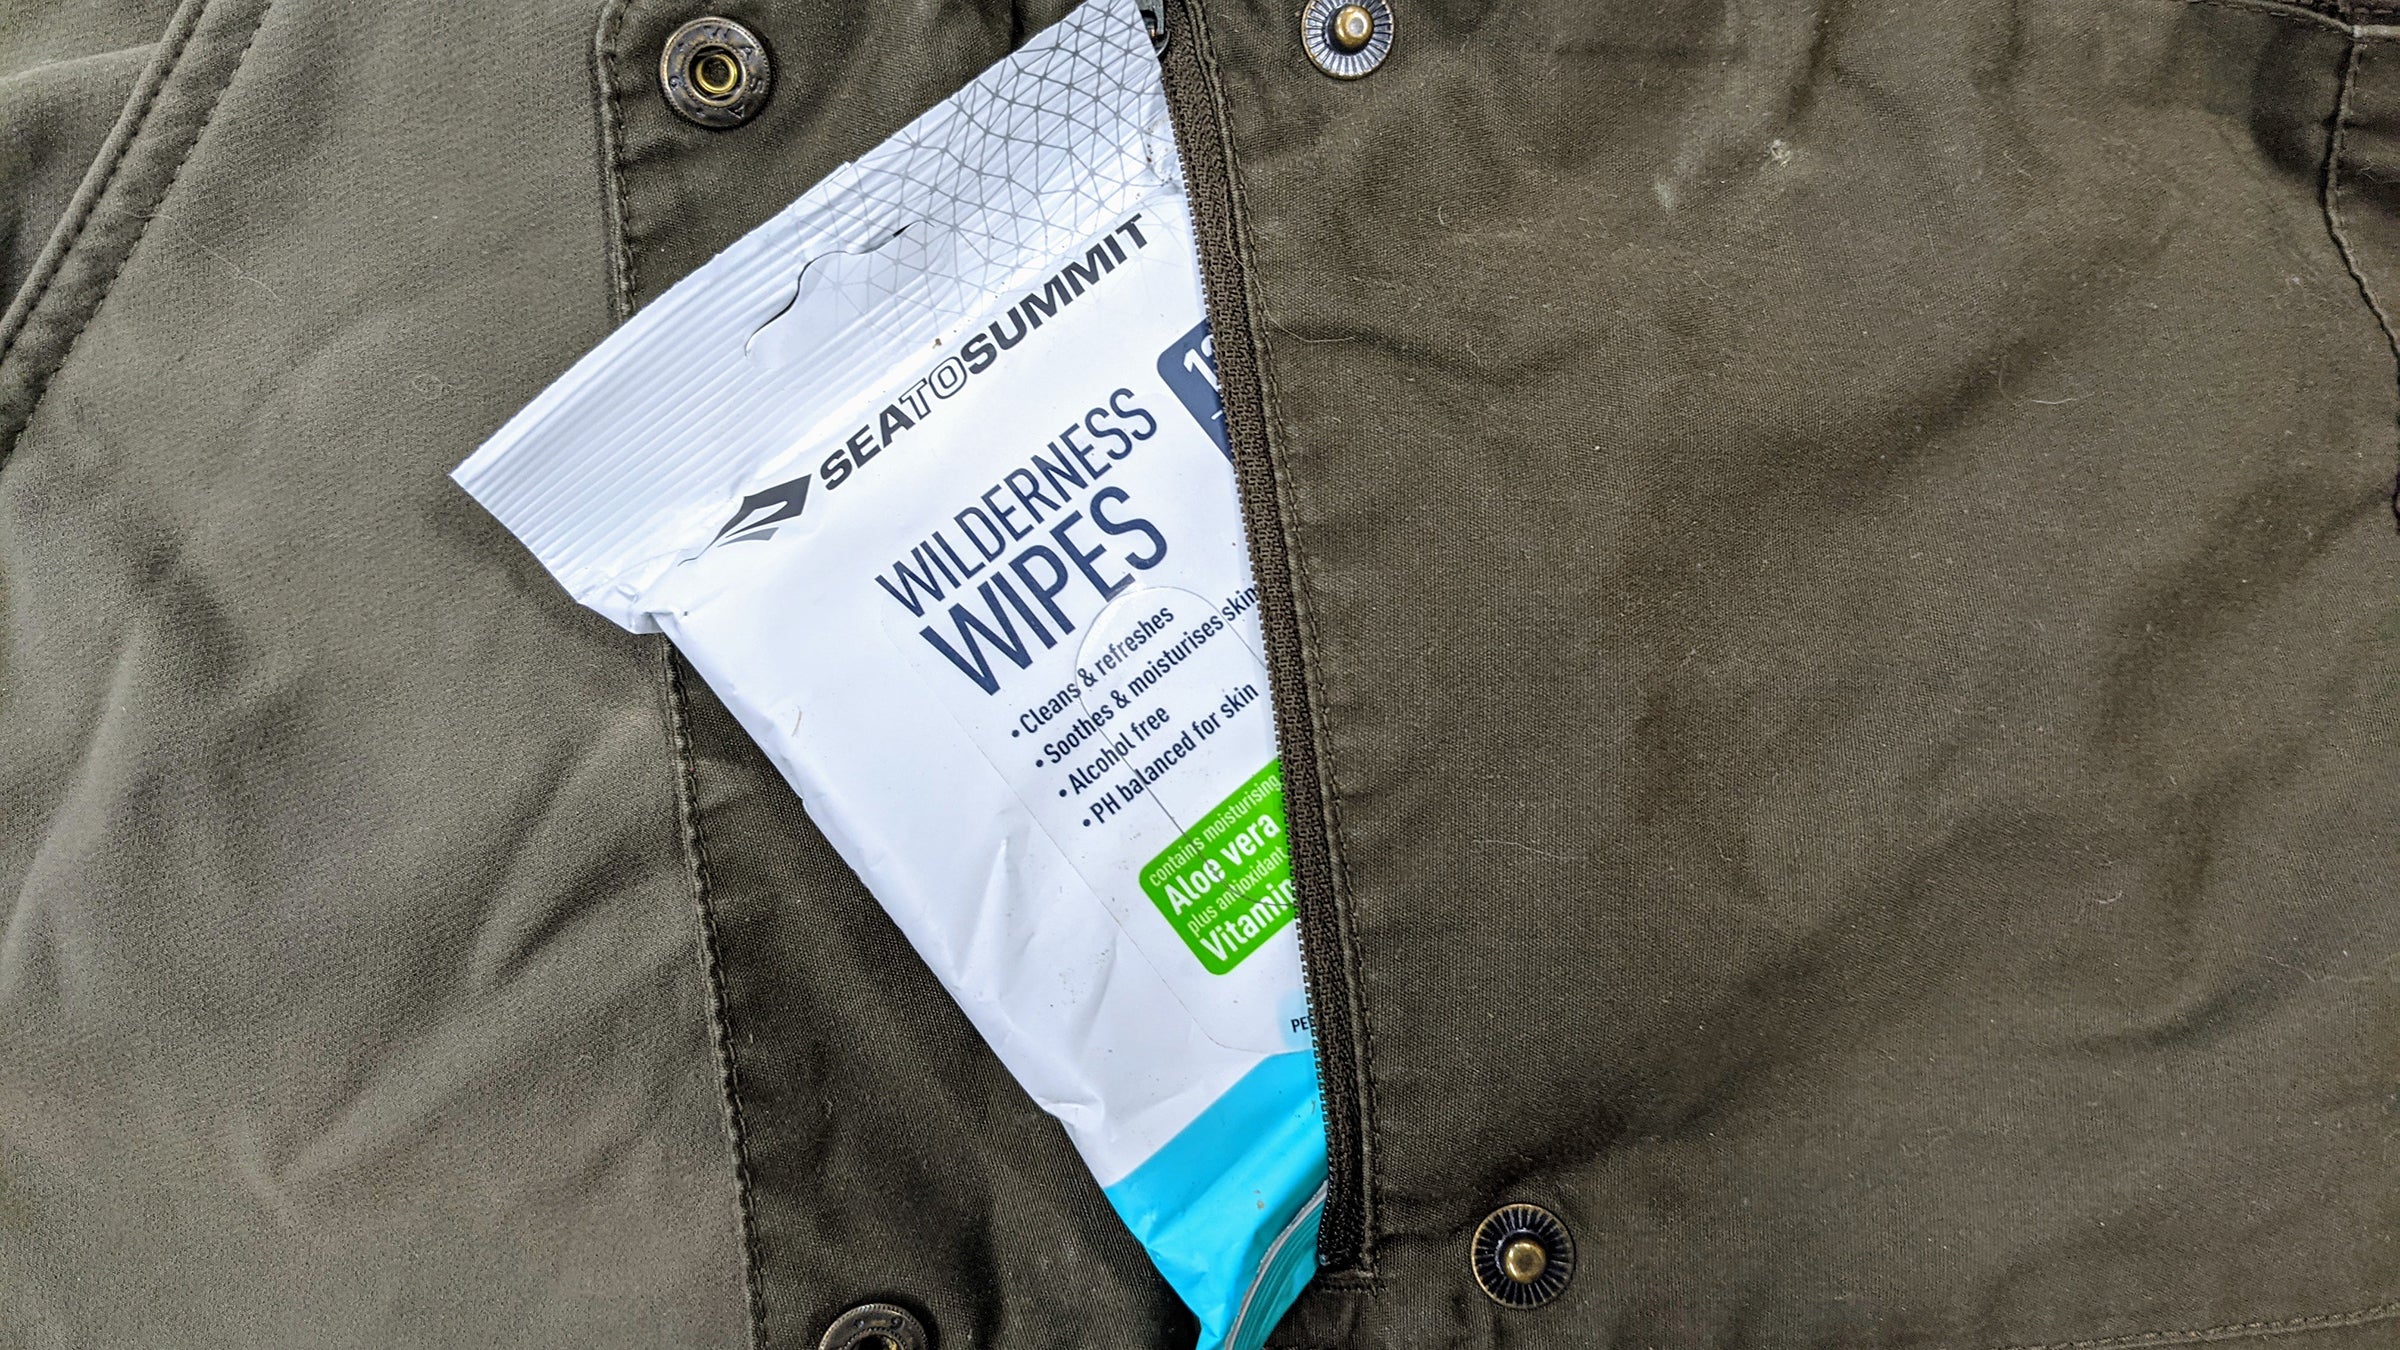 Sea to Summit Washing Products: Pocket Laundry Wash vs Wilderness Wash •  Her Packing List